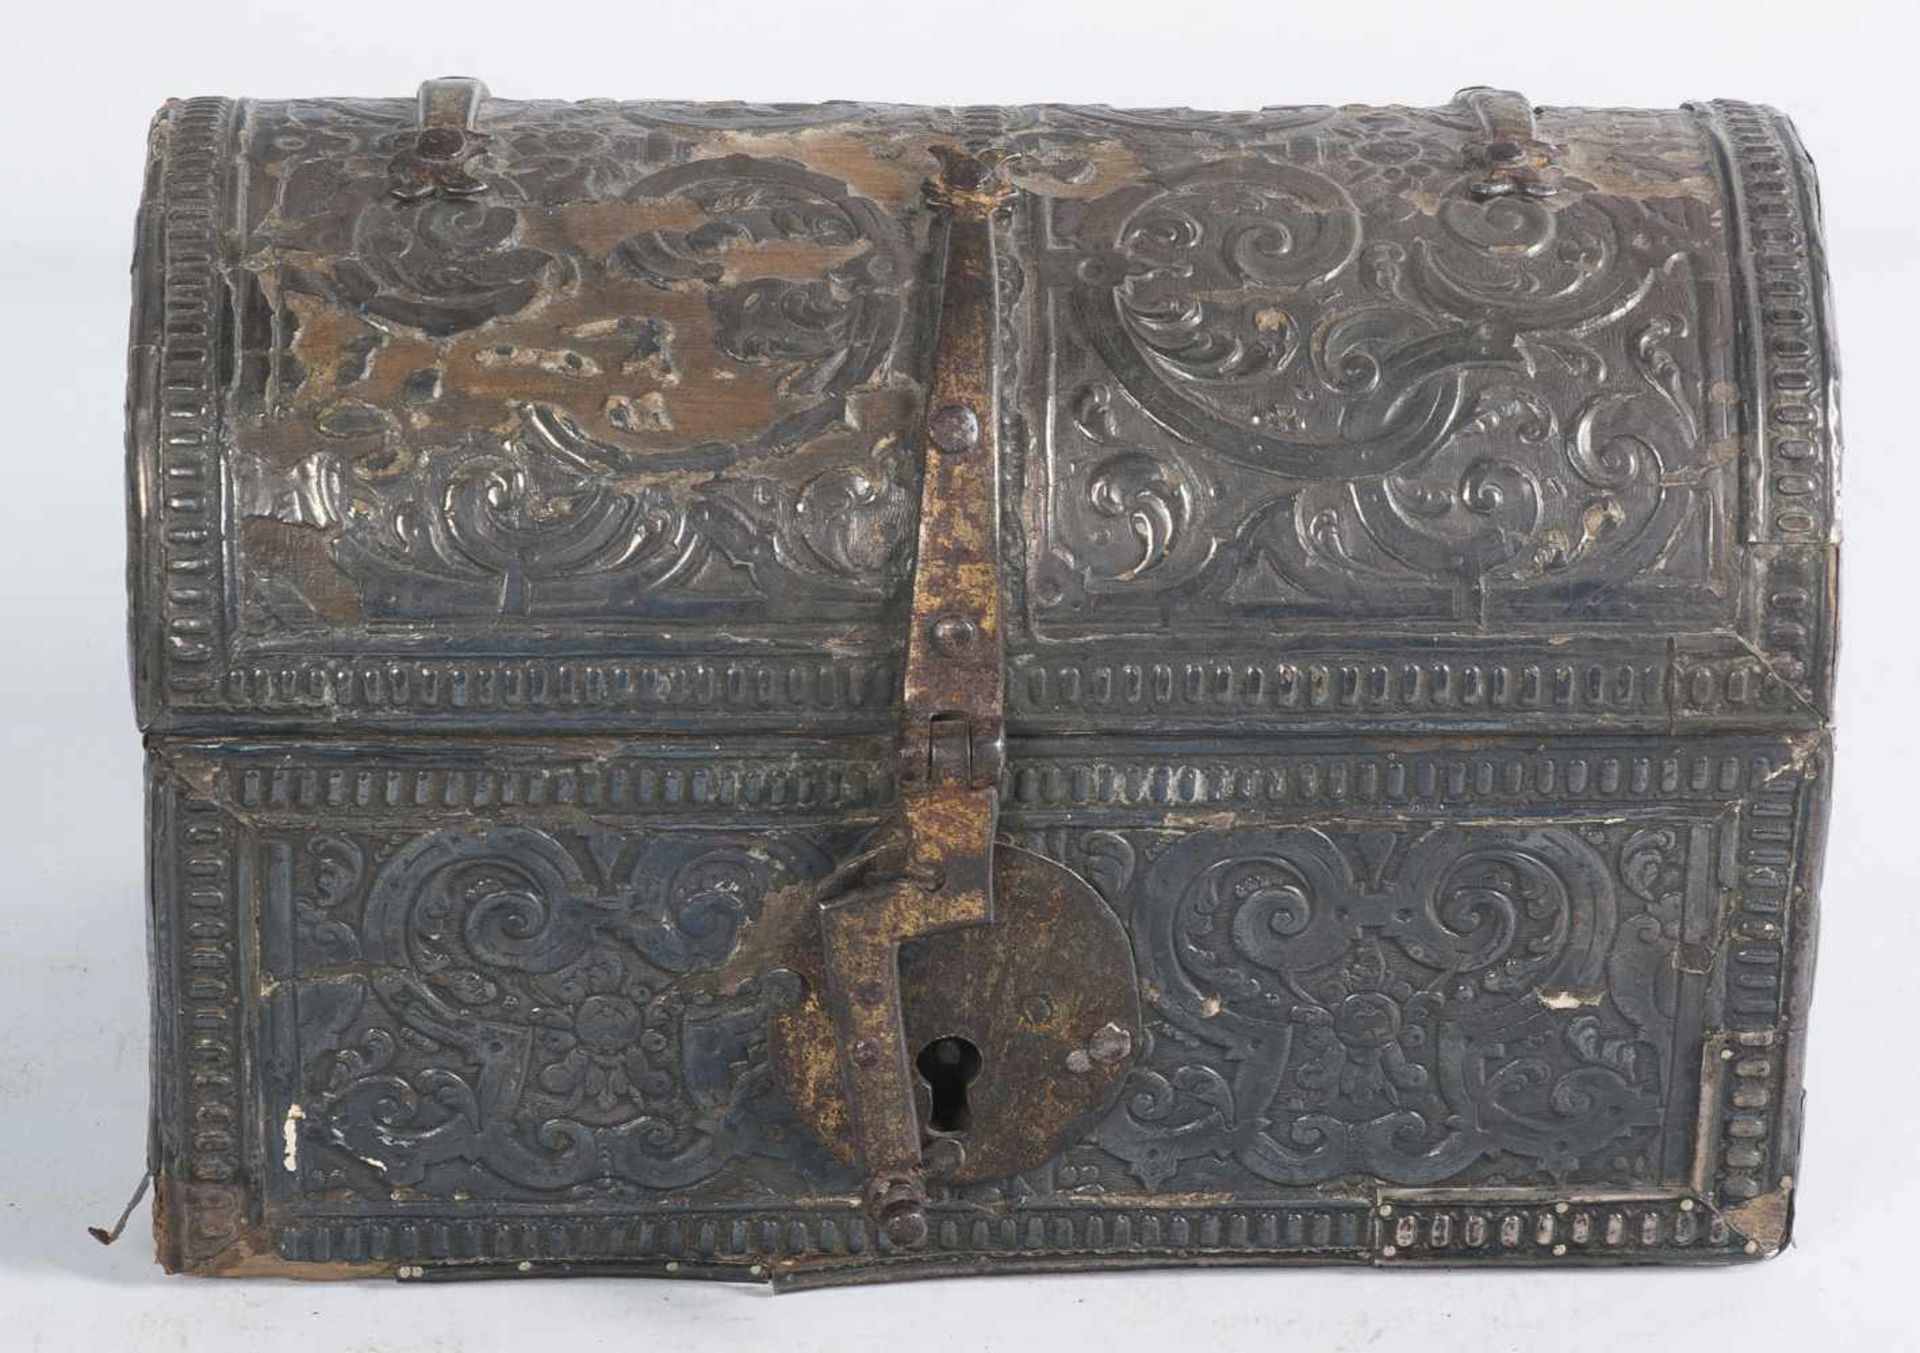 Small silver and gilded metal chest with iron fittings. Spain. 17th century. - Bild 3 aus 6